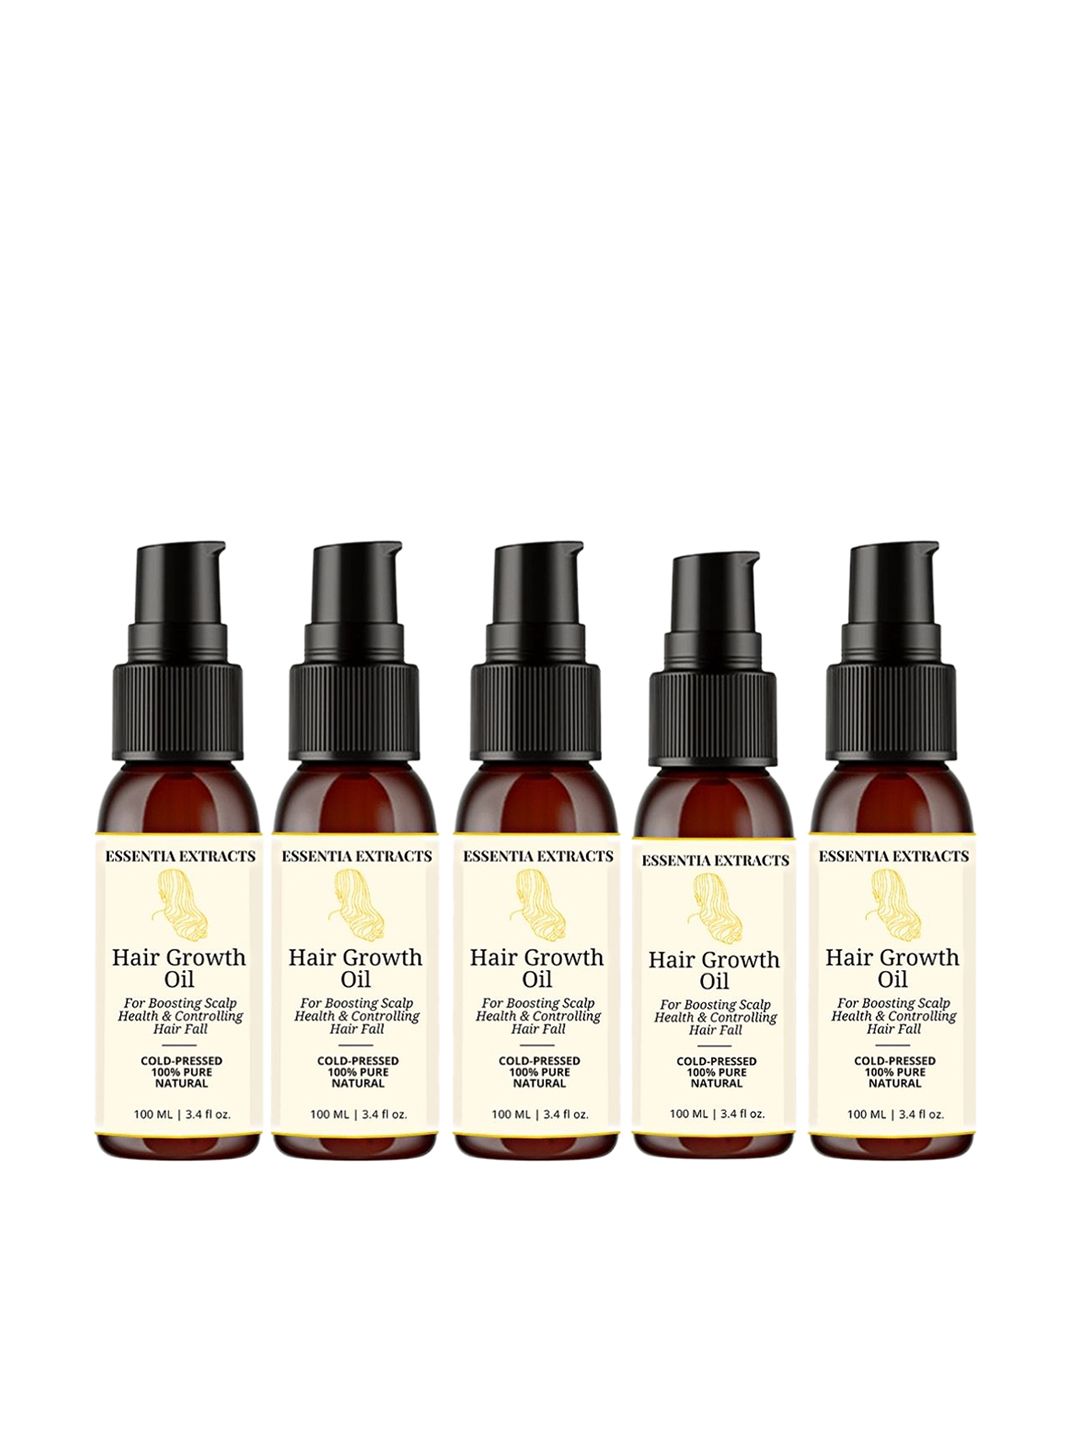 ESSENTIA EXTRACTS Set of 5 Cold Pressed 100% Pure Natural Hair Growth Oil - 100 ml Each Price in India